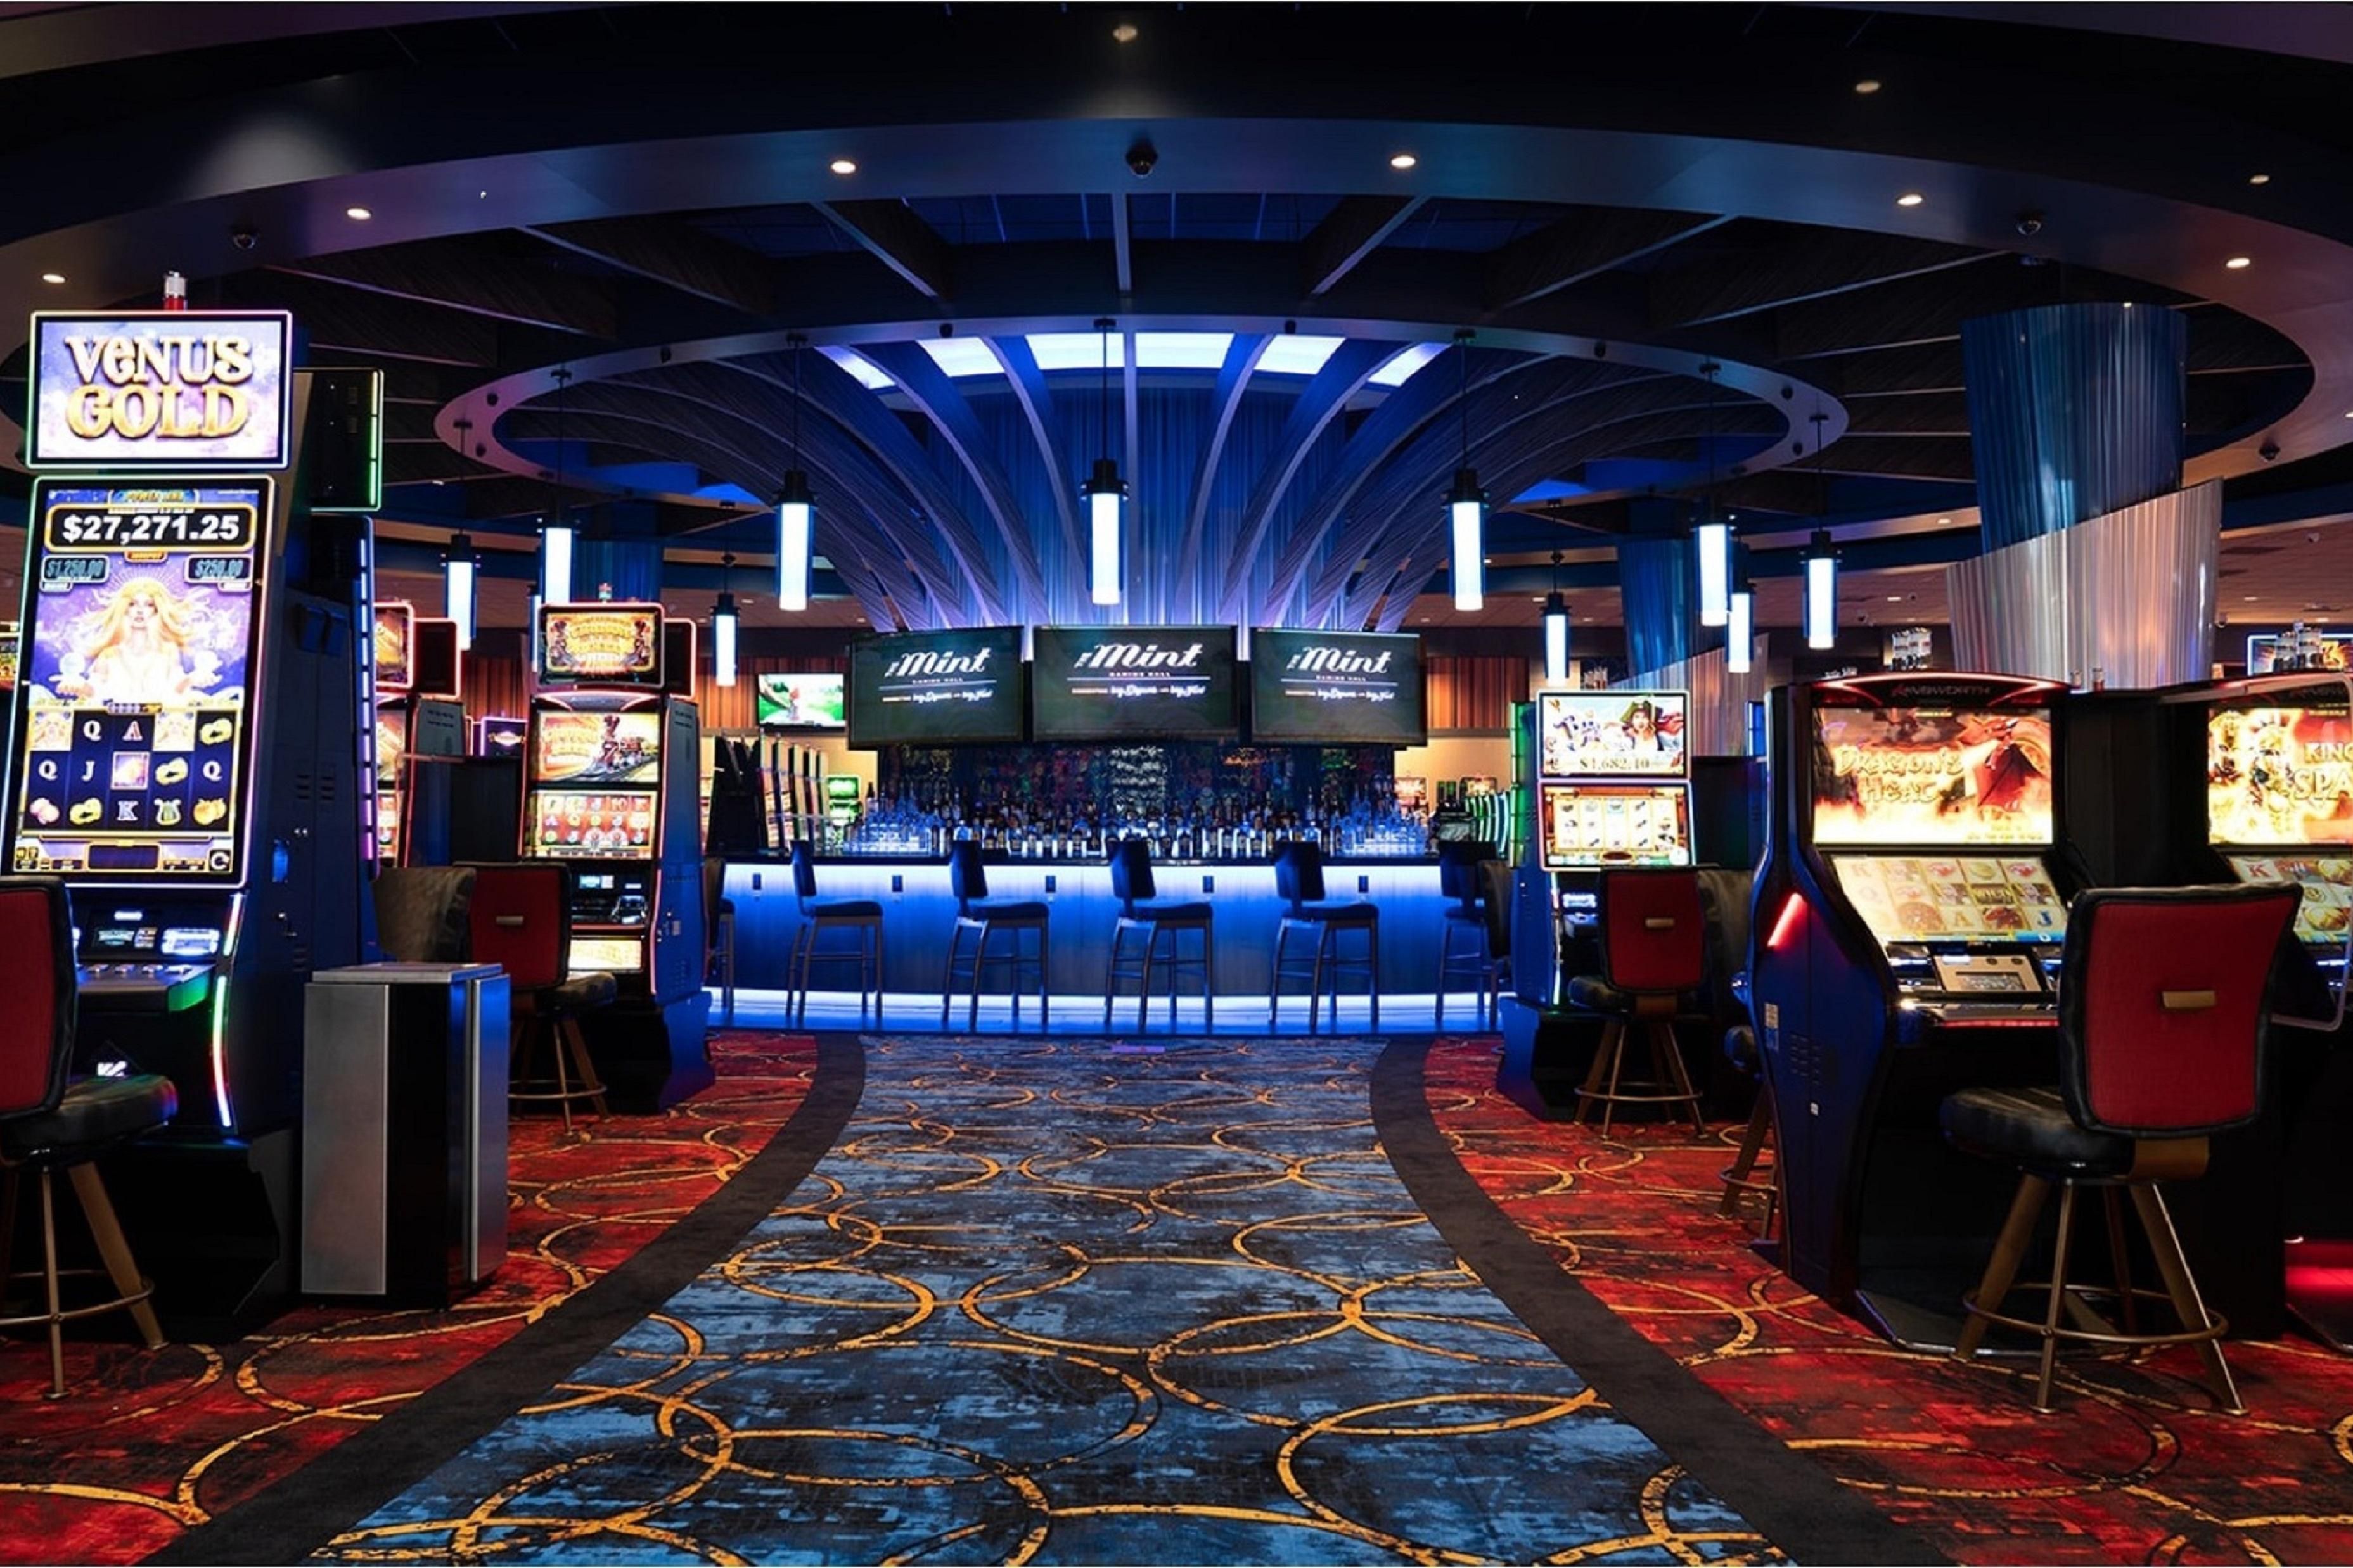 NEW TO BOWLING GREEN! All new games, winners circle bar, post time race & sports lounge, corner café, simulcast wagering 7 days a week, entertainment and more! New ways to play, only 3 miles away!